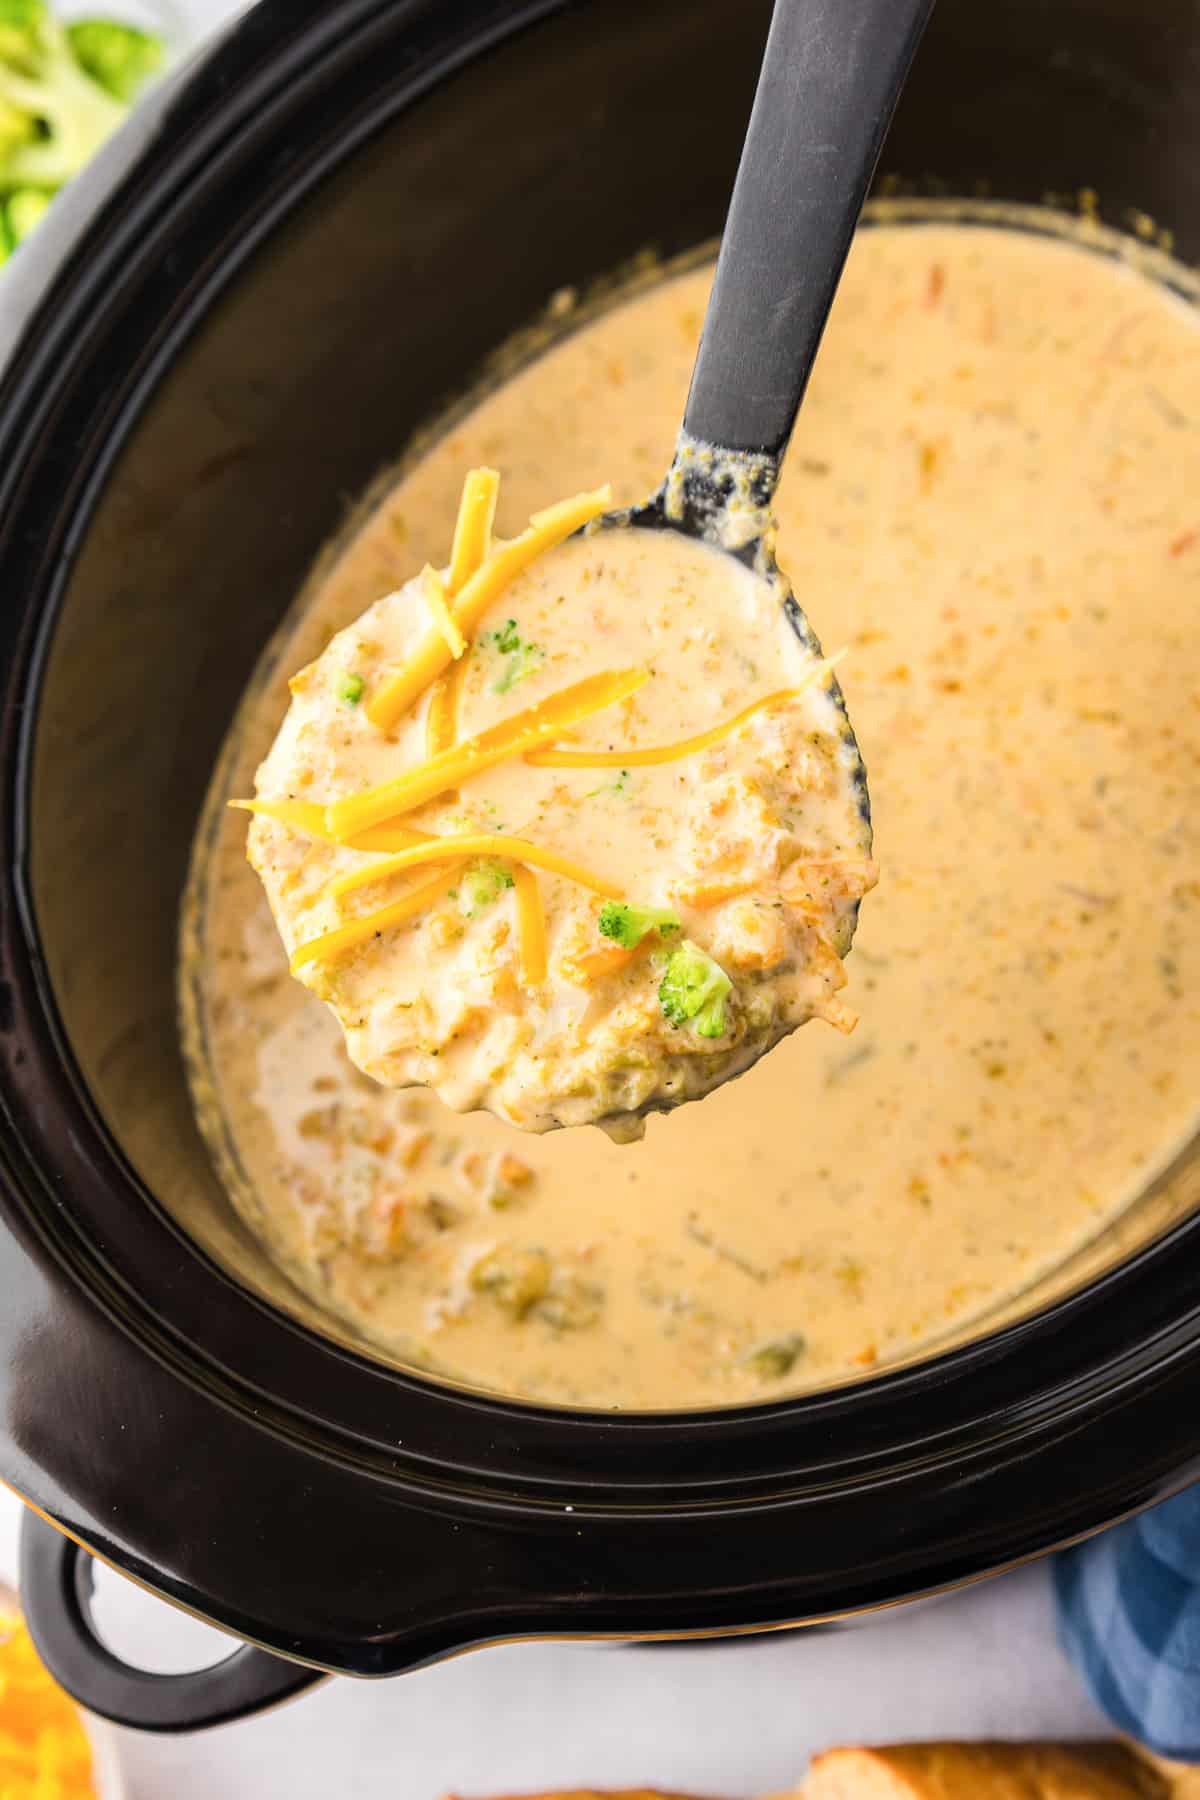 A ladle lifting a scoop of broccoli cheese soup from a slow cooker.